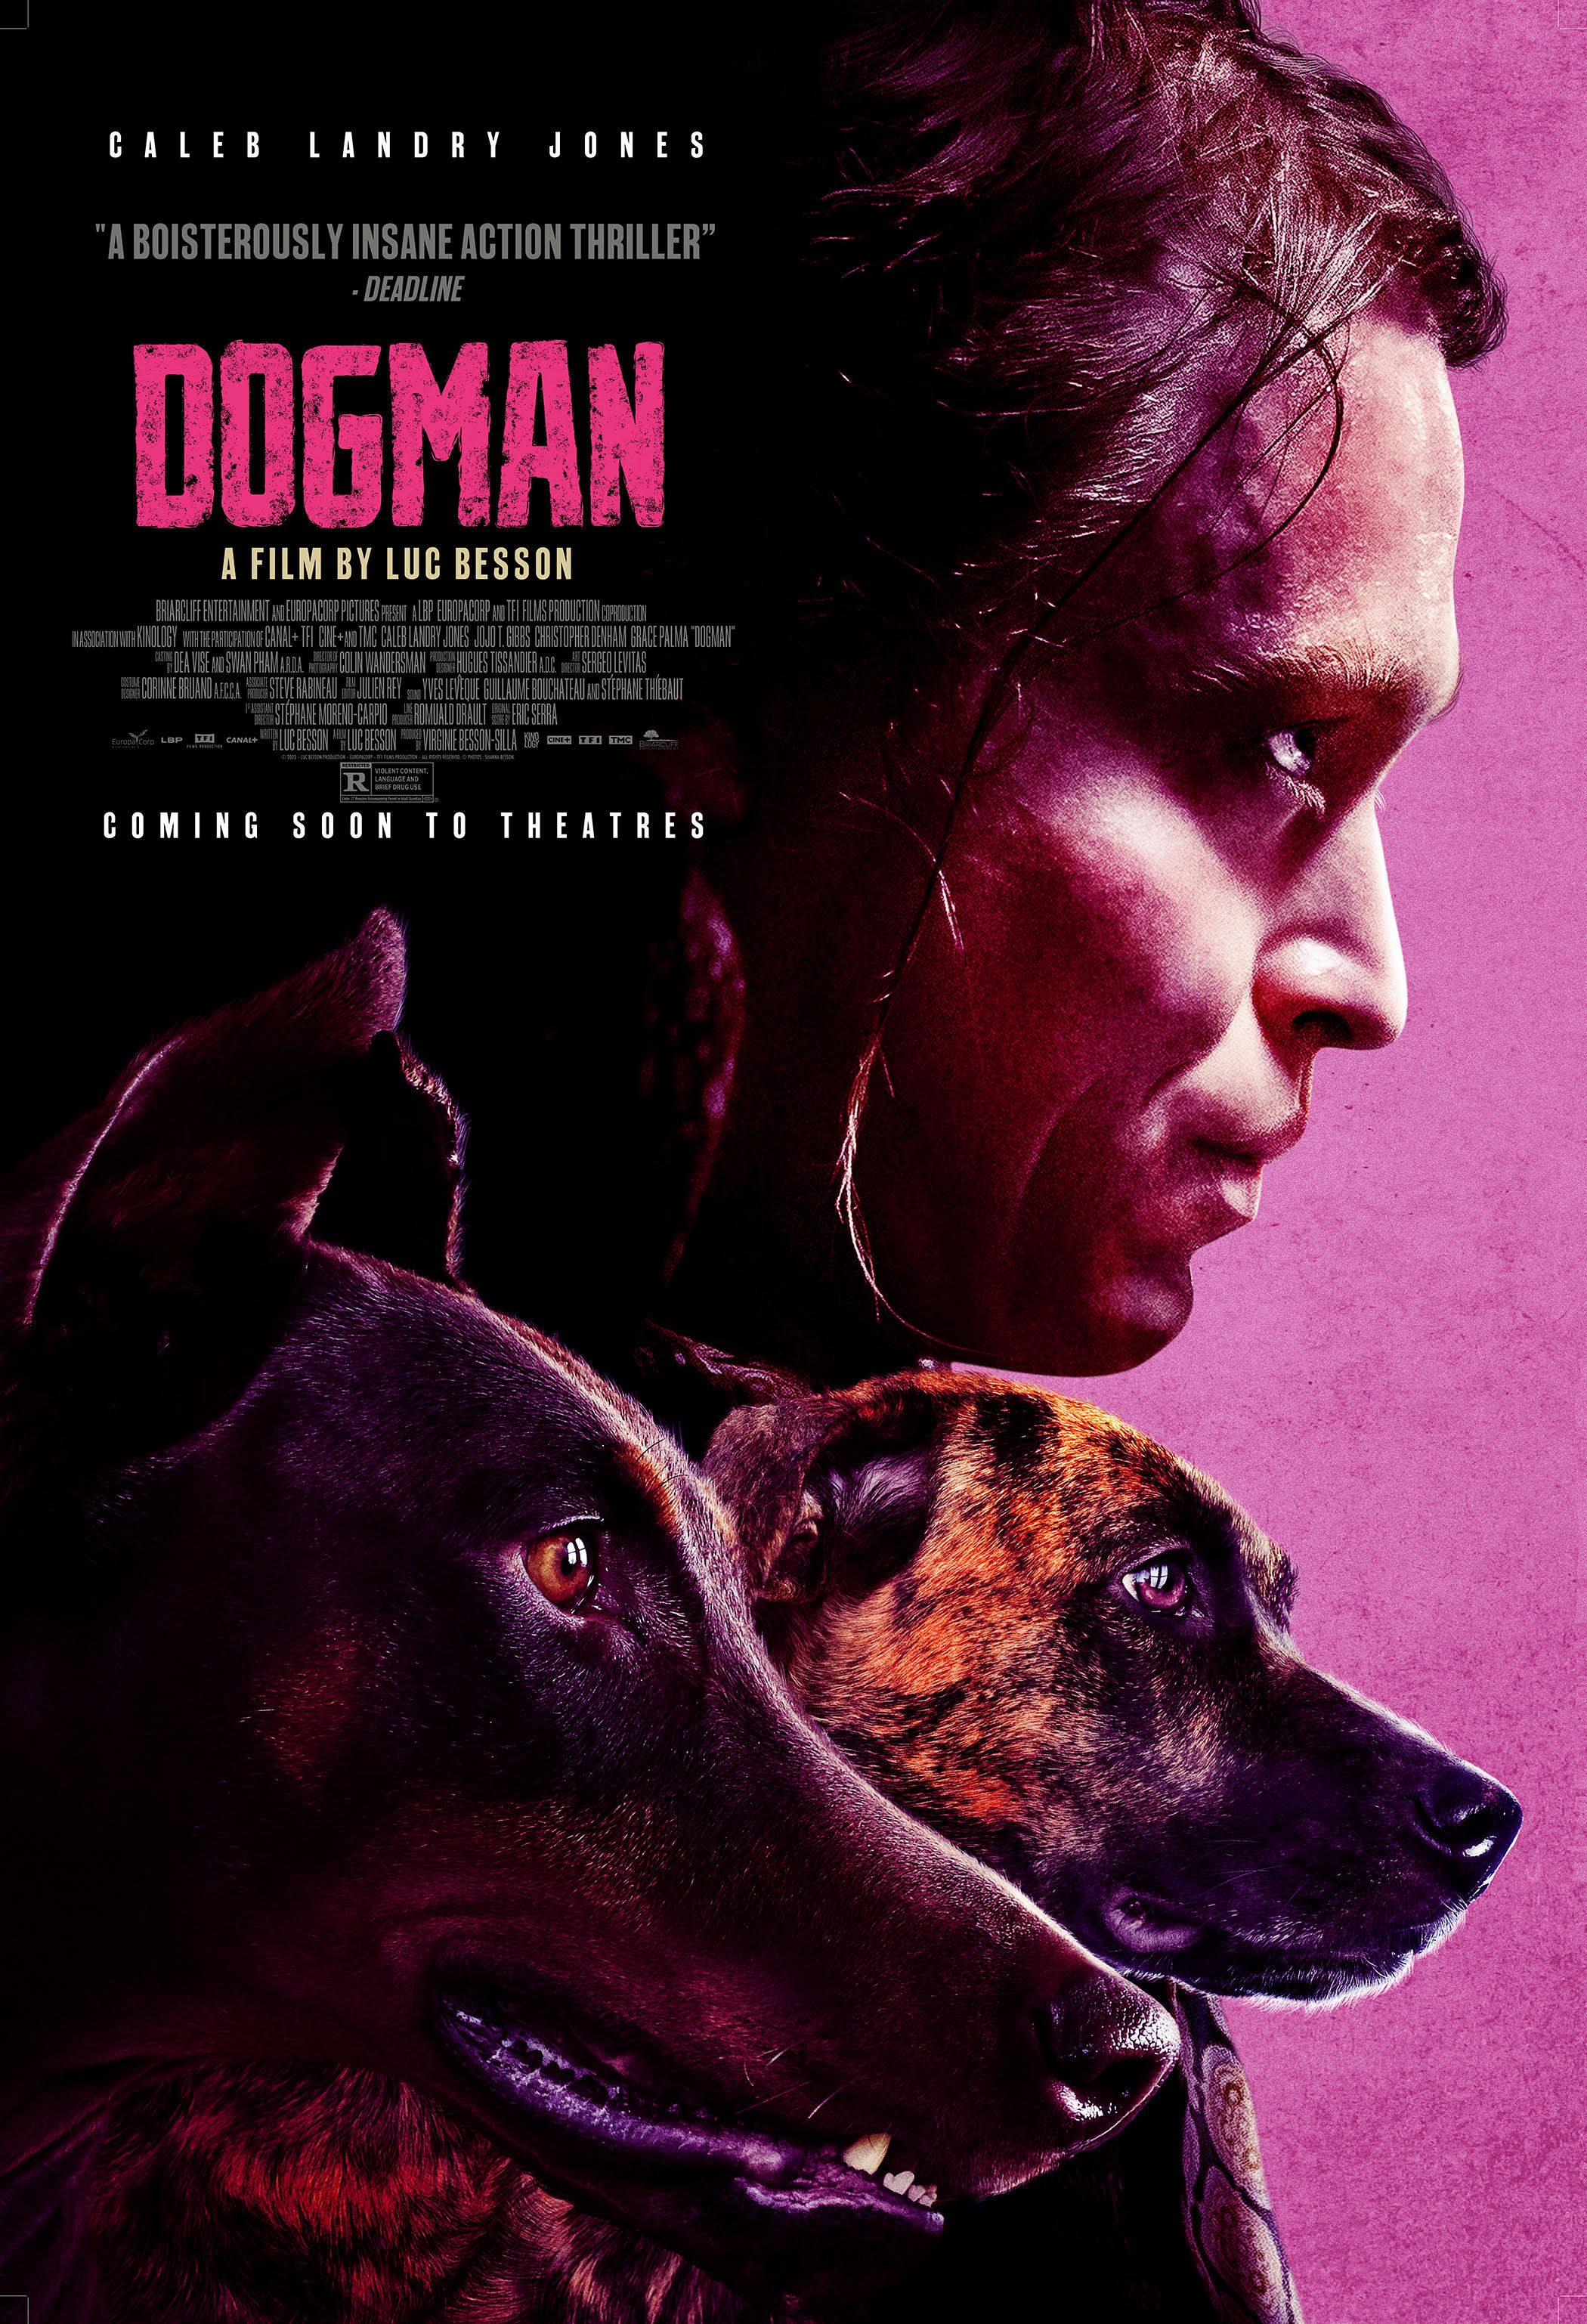 New Trailer For Luc Besson’s DogMan Showcases Style, Action & Caleb Landry Jones